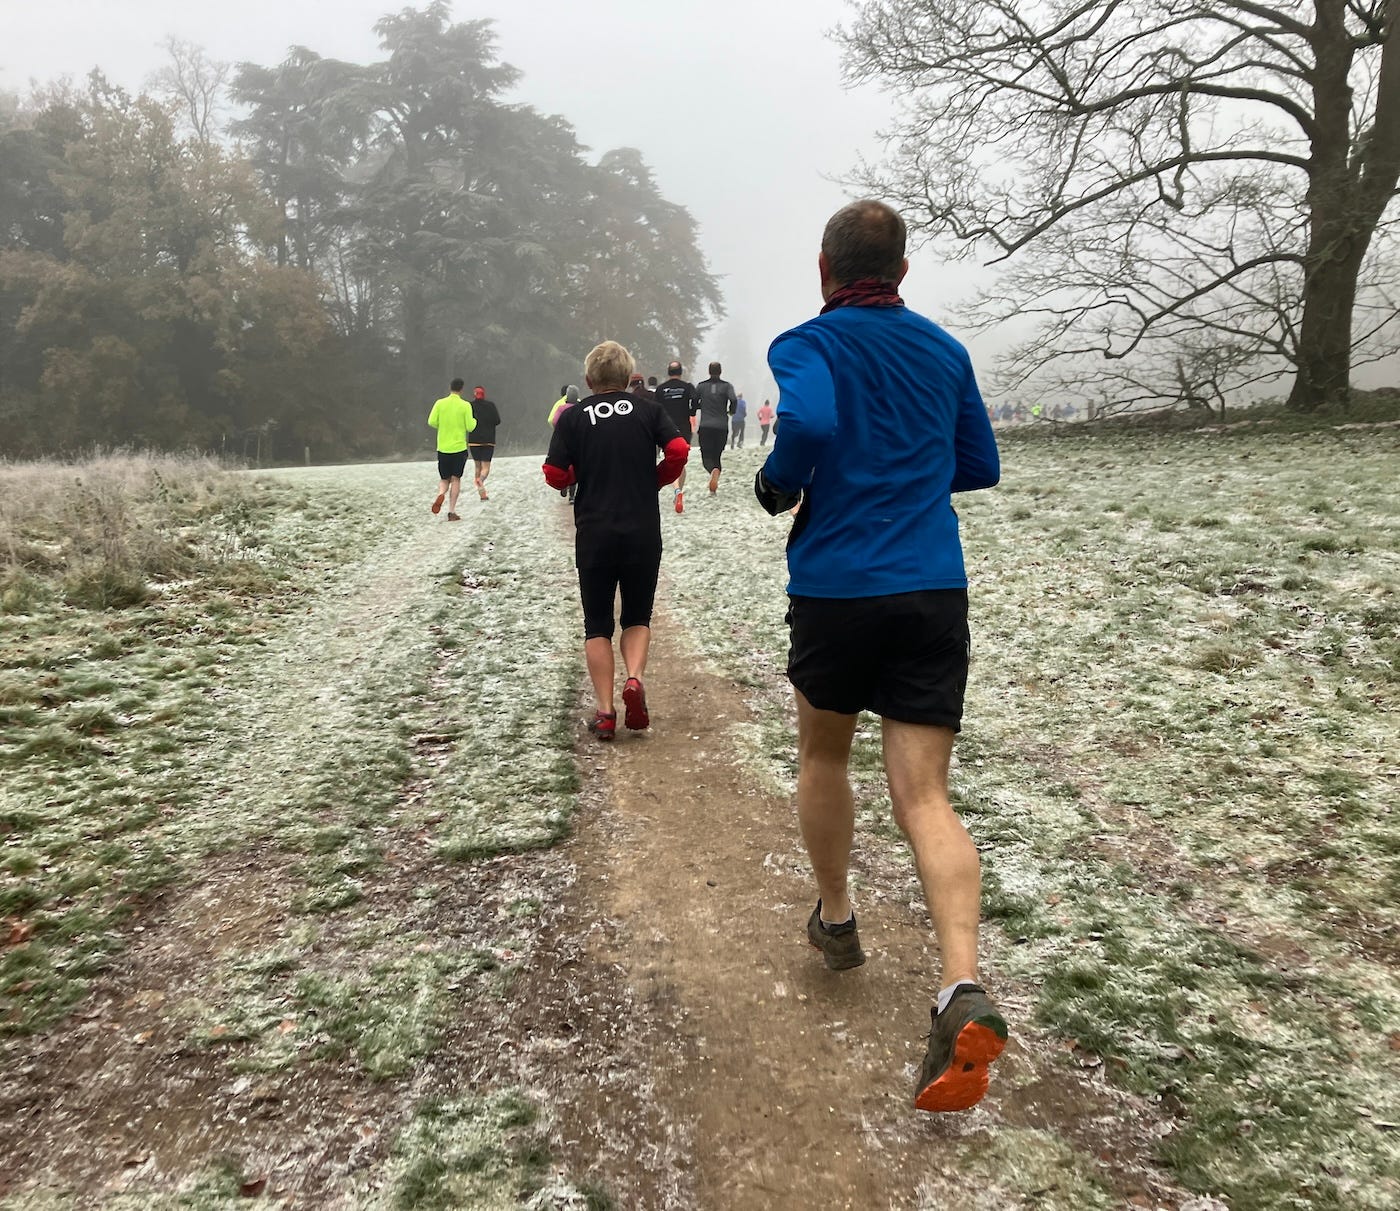 Runners heading into a misty horizon on hard ground topped with white frost